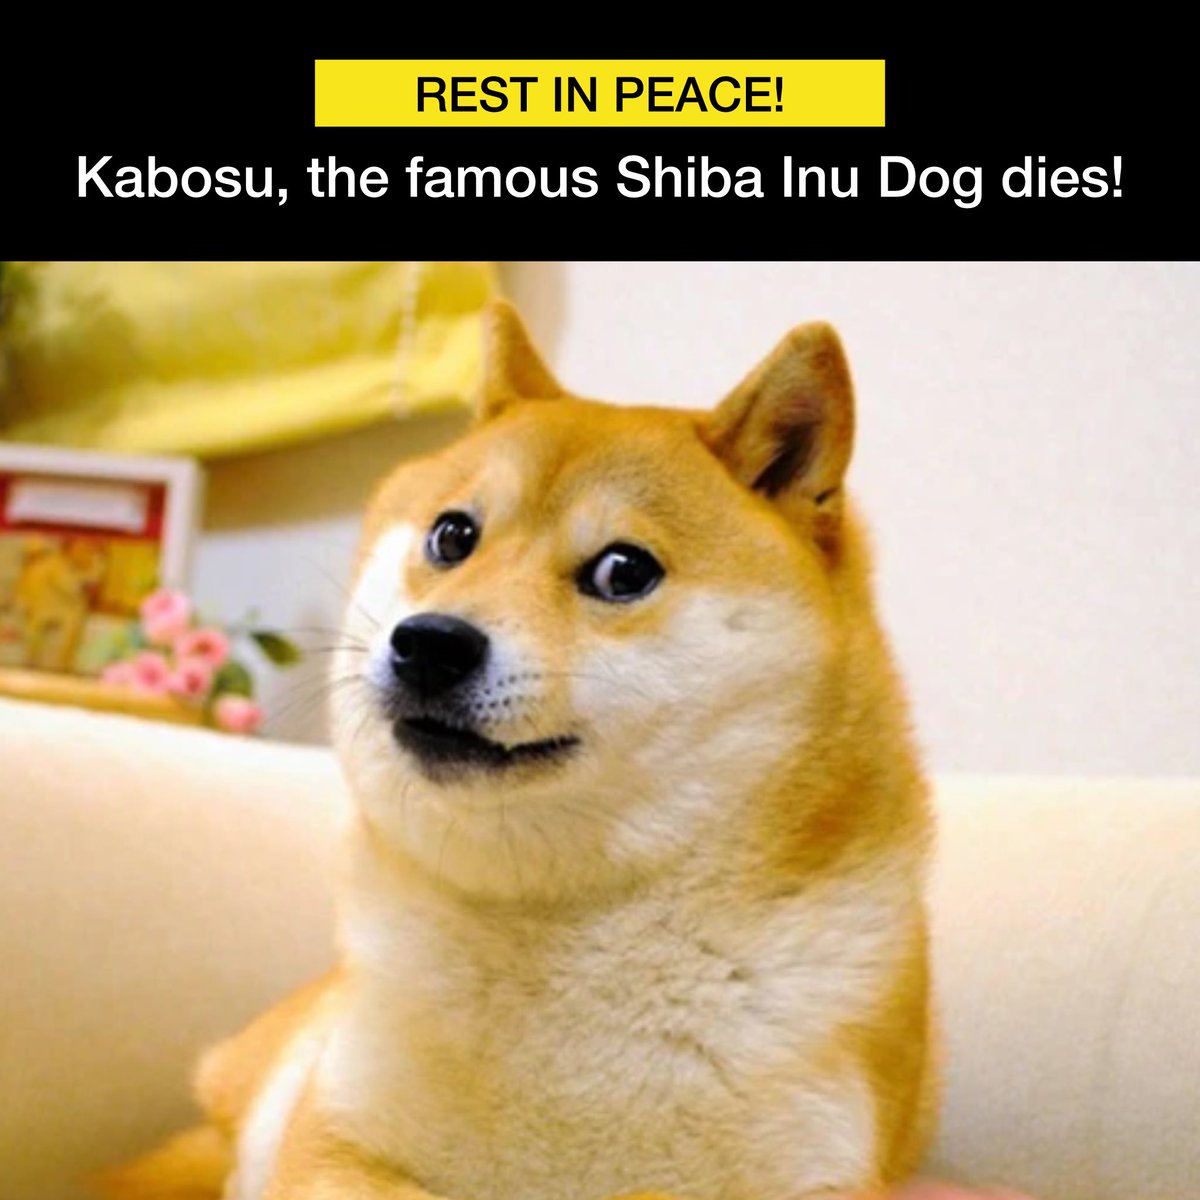 Popular Japanese dog Kabosu, the face of Dogecoin and memes, has died at the age of 18. She was one of the most famous dogs in the world.

Kabosu’s viral meme picture inspired the creation of dogecoin (DOGE) in 2013. 

Rest in peace 🕊️
#kabosu #meme #dogecoin #nonextquestion